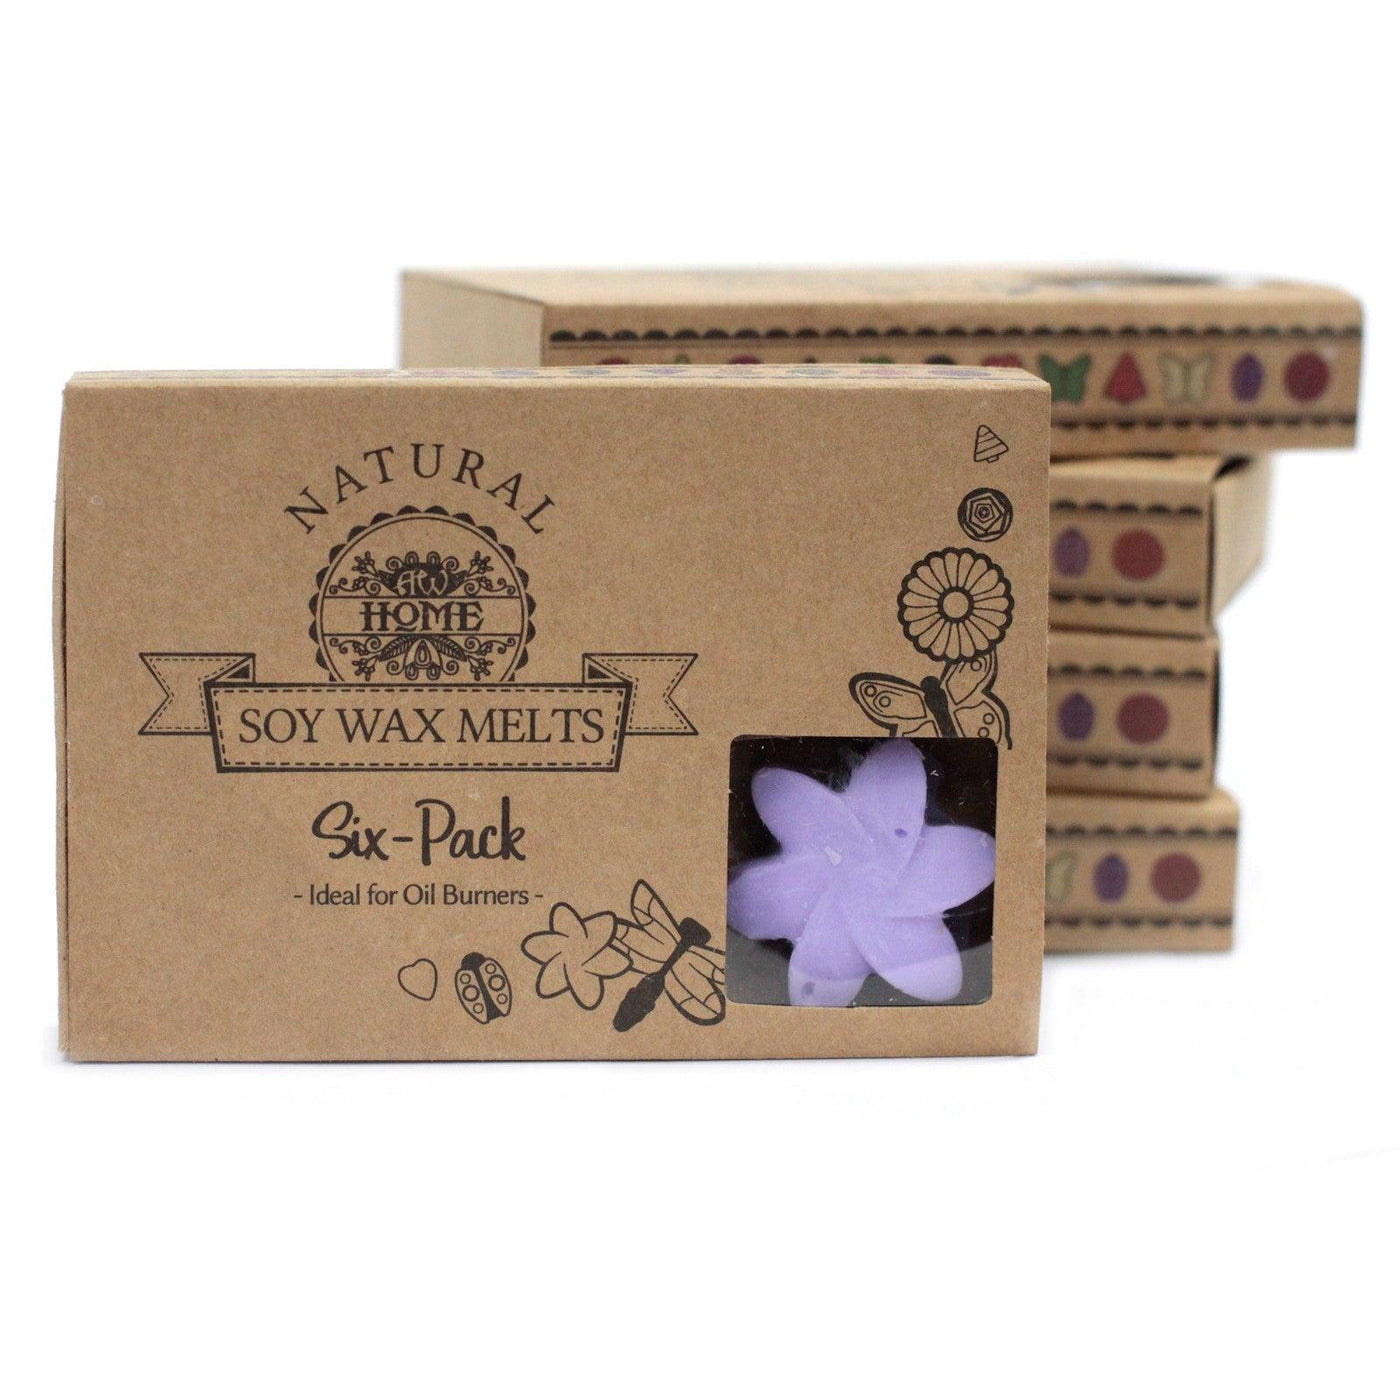 Box of 6 Star Shaped Lilac Wax Melts – Lavender Fields.